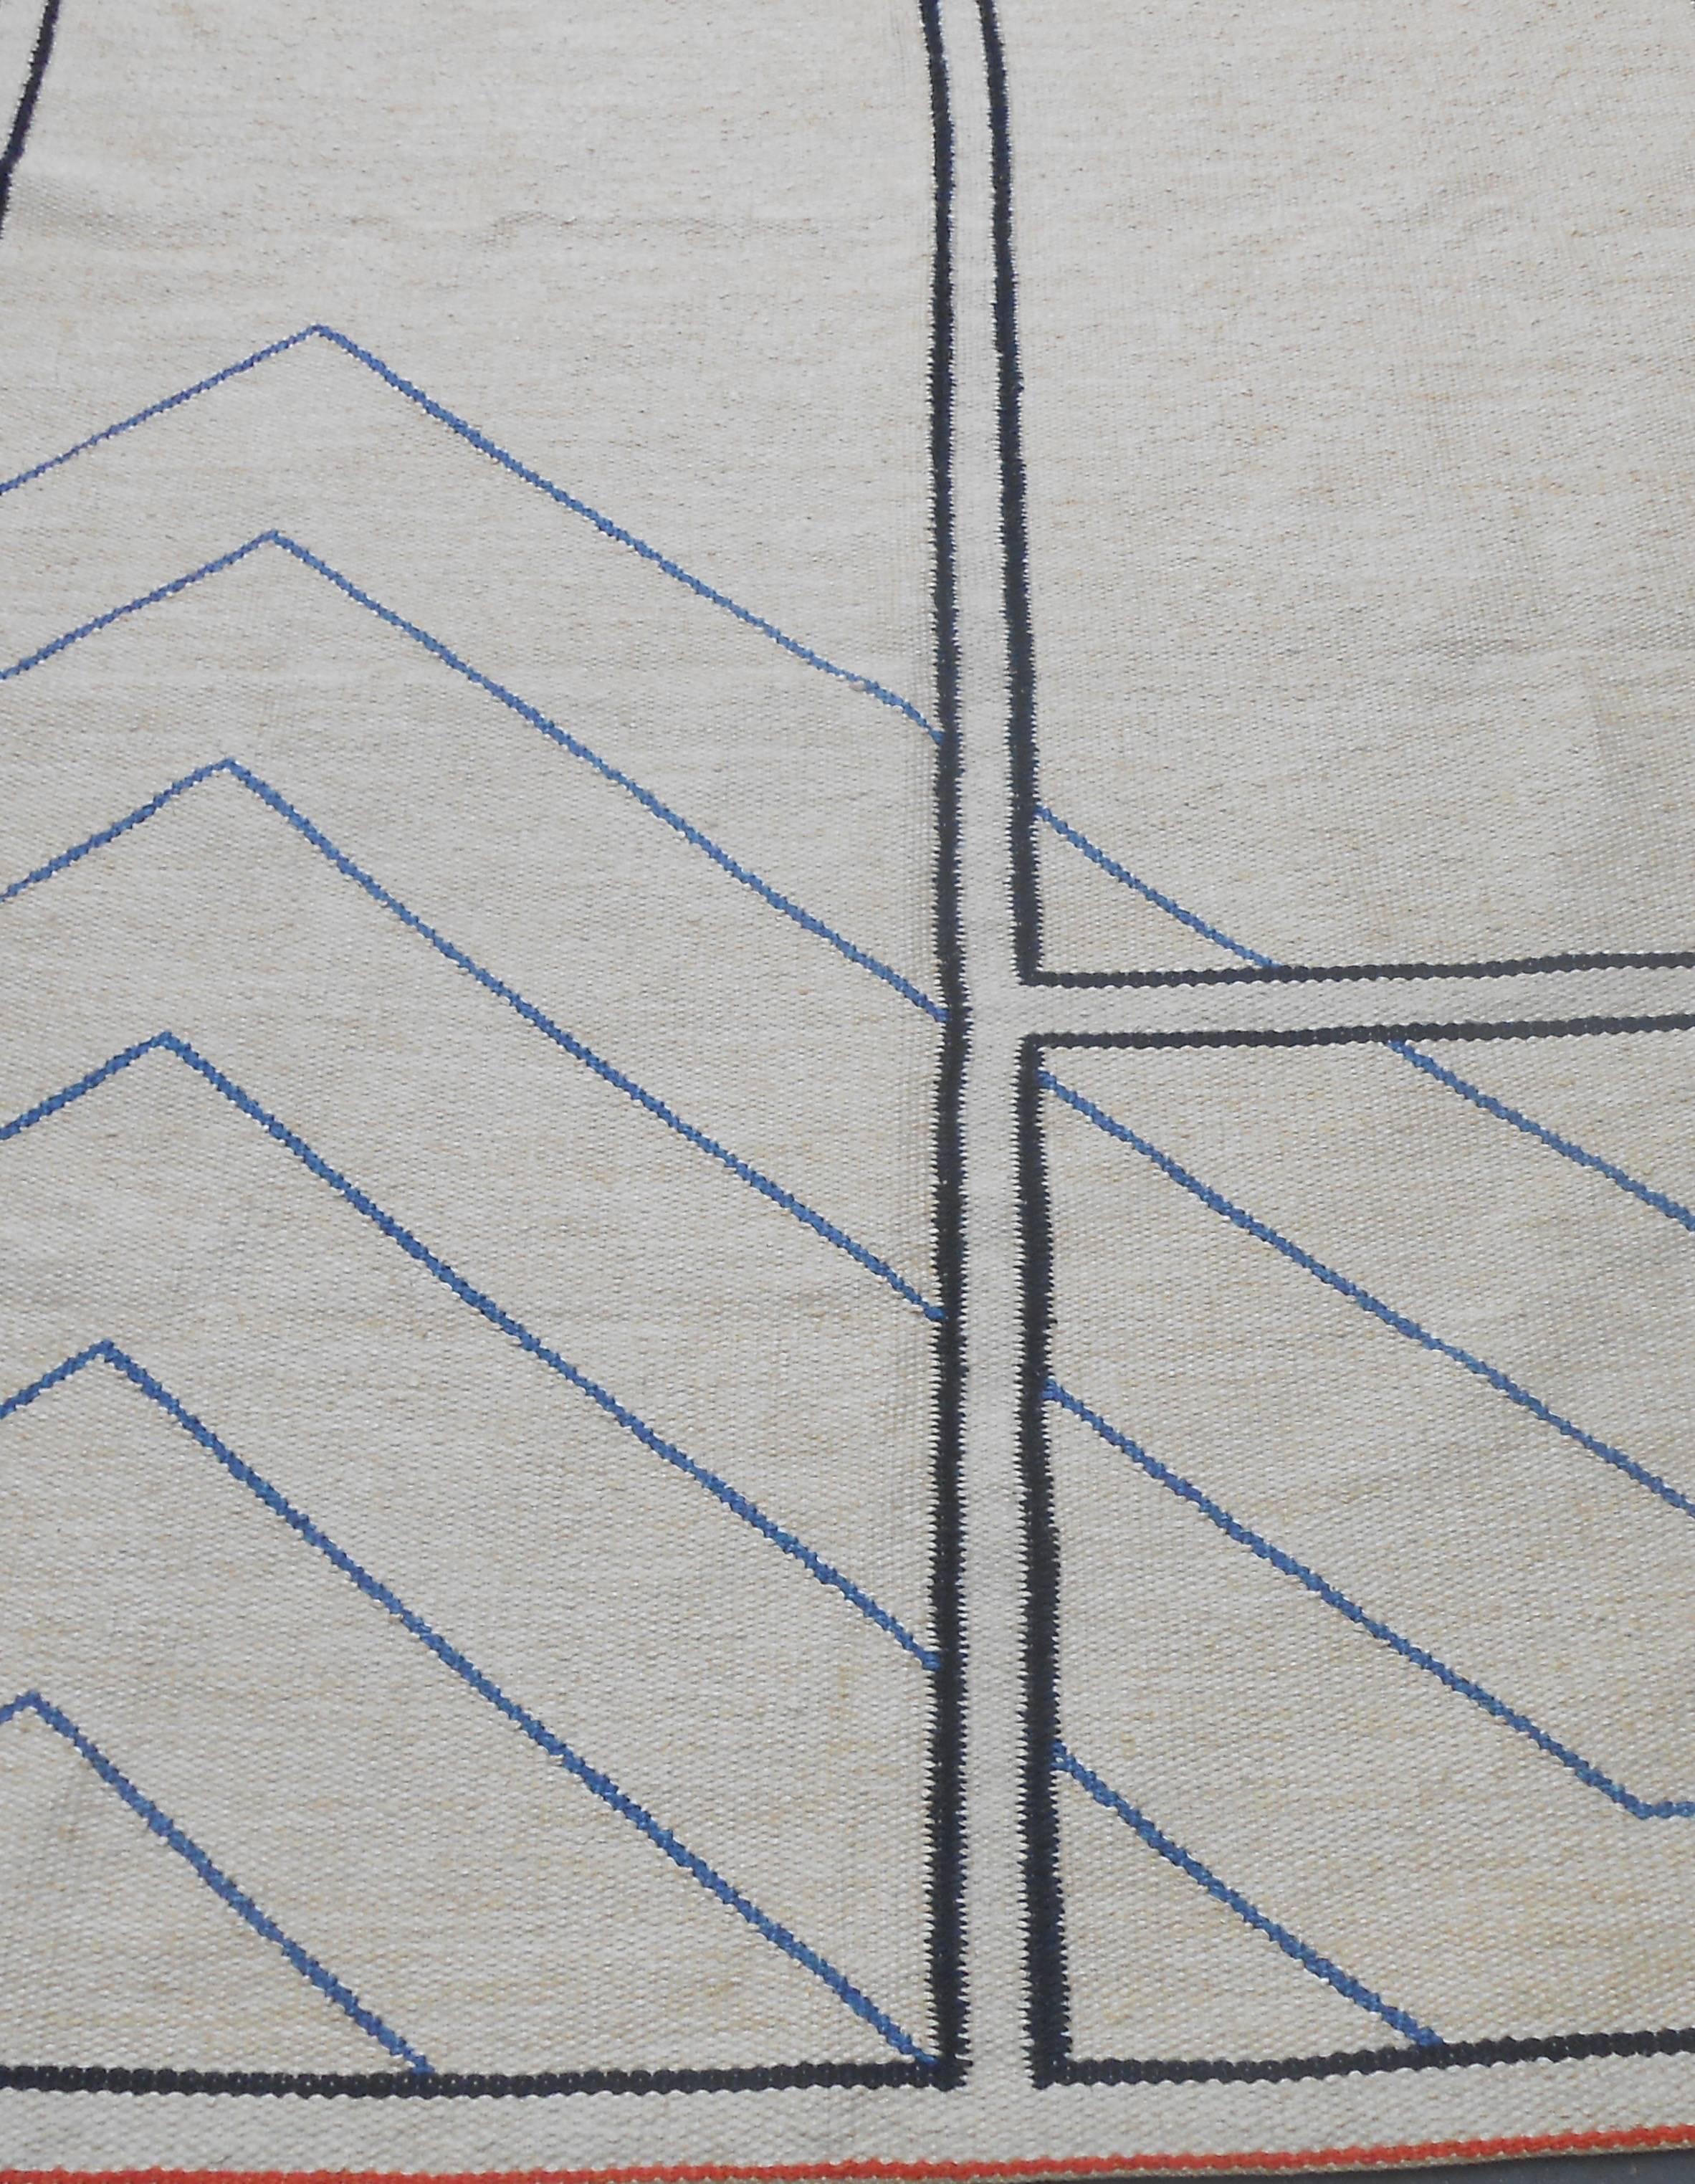 Hand-Woven Unique Gudrun Pagter Art Tapestry 'Composition with Blue Lines, ' circa 1970